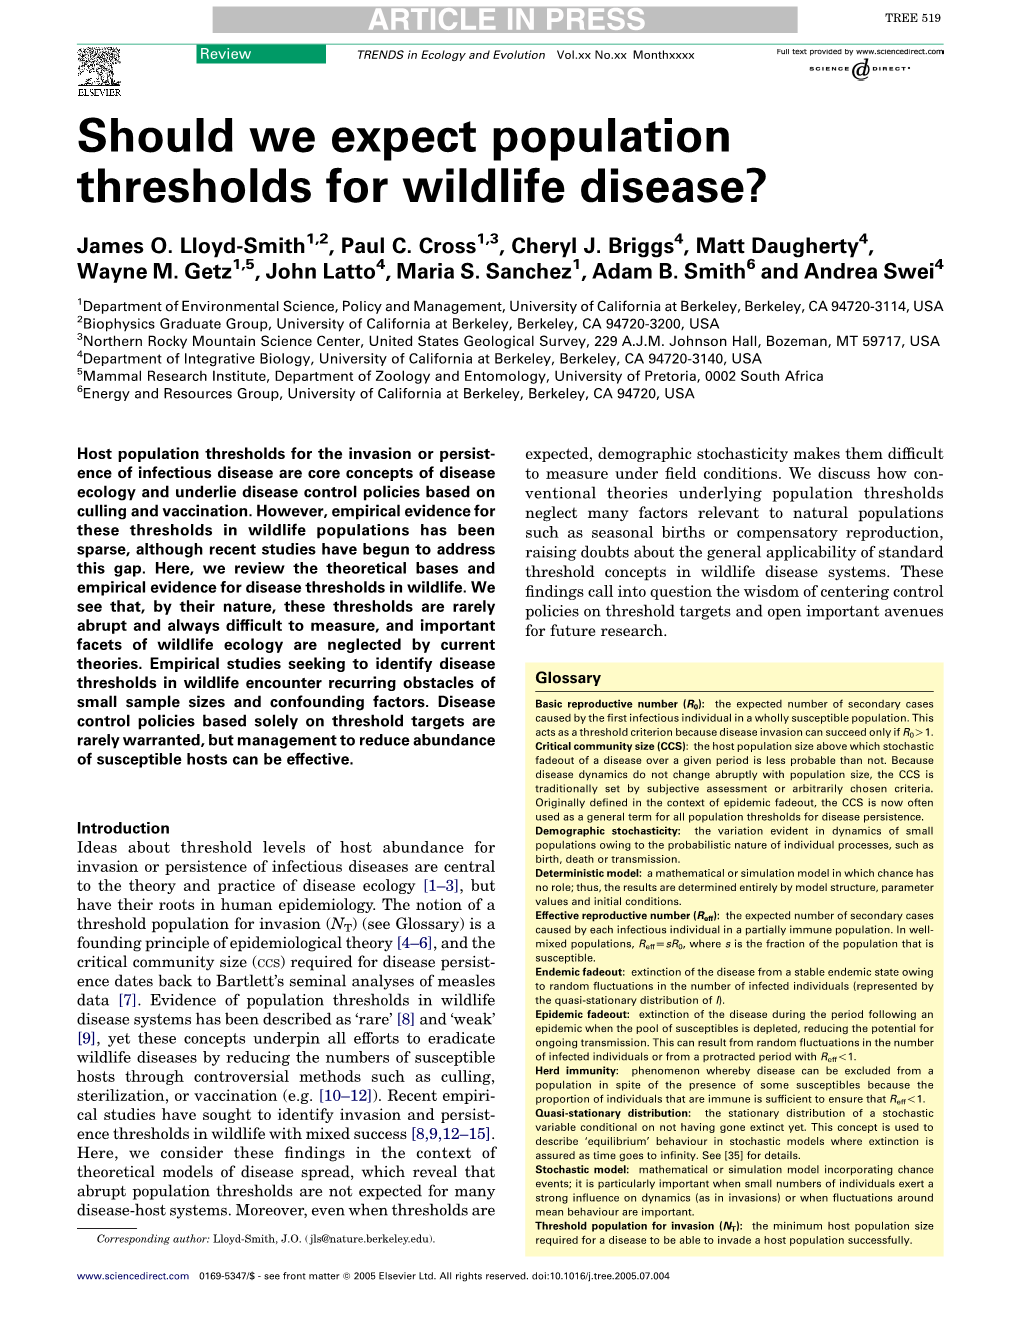 Should We Expect Population Thresholds for Wildlife Disease?